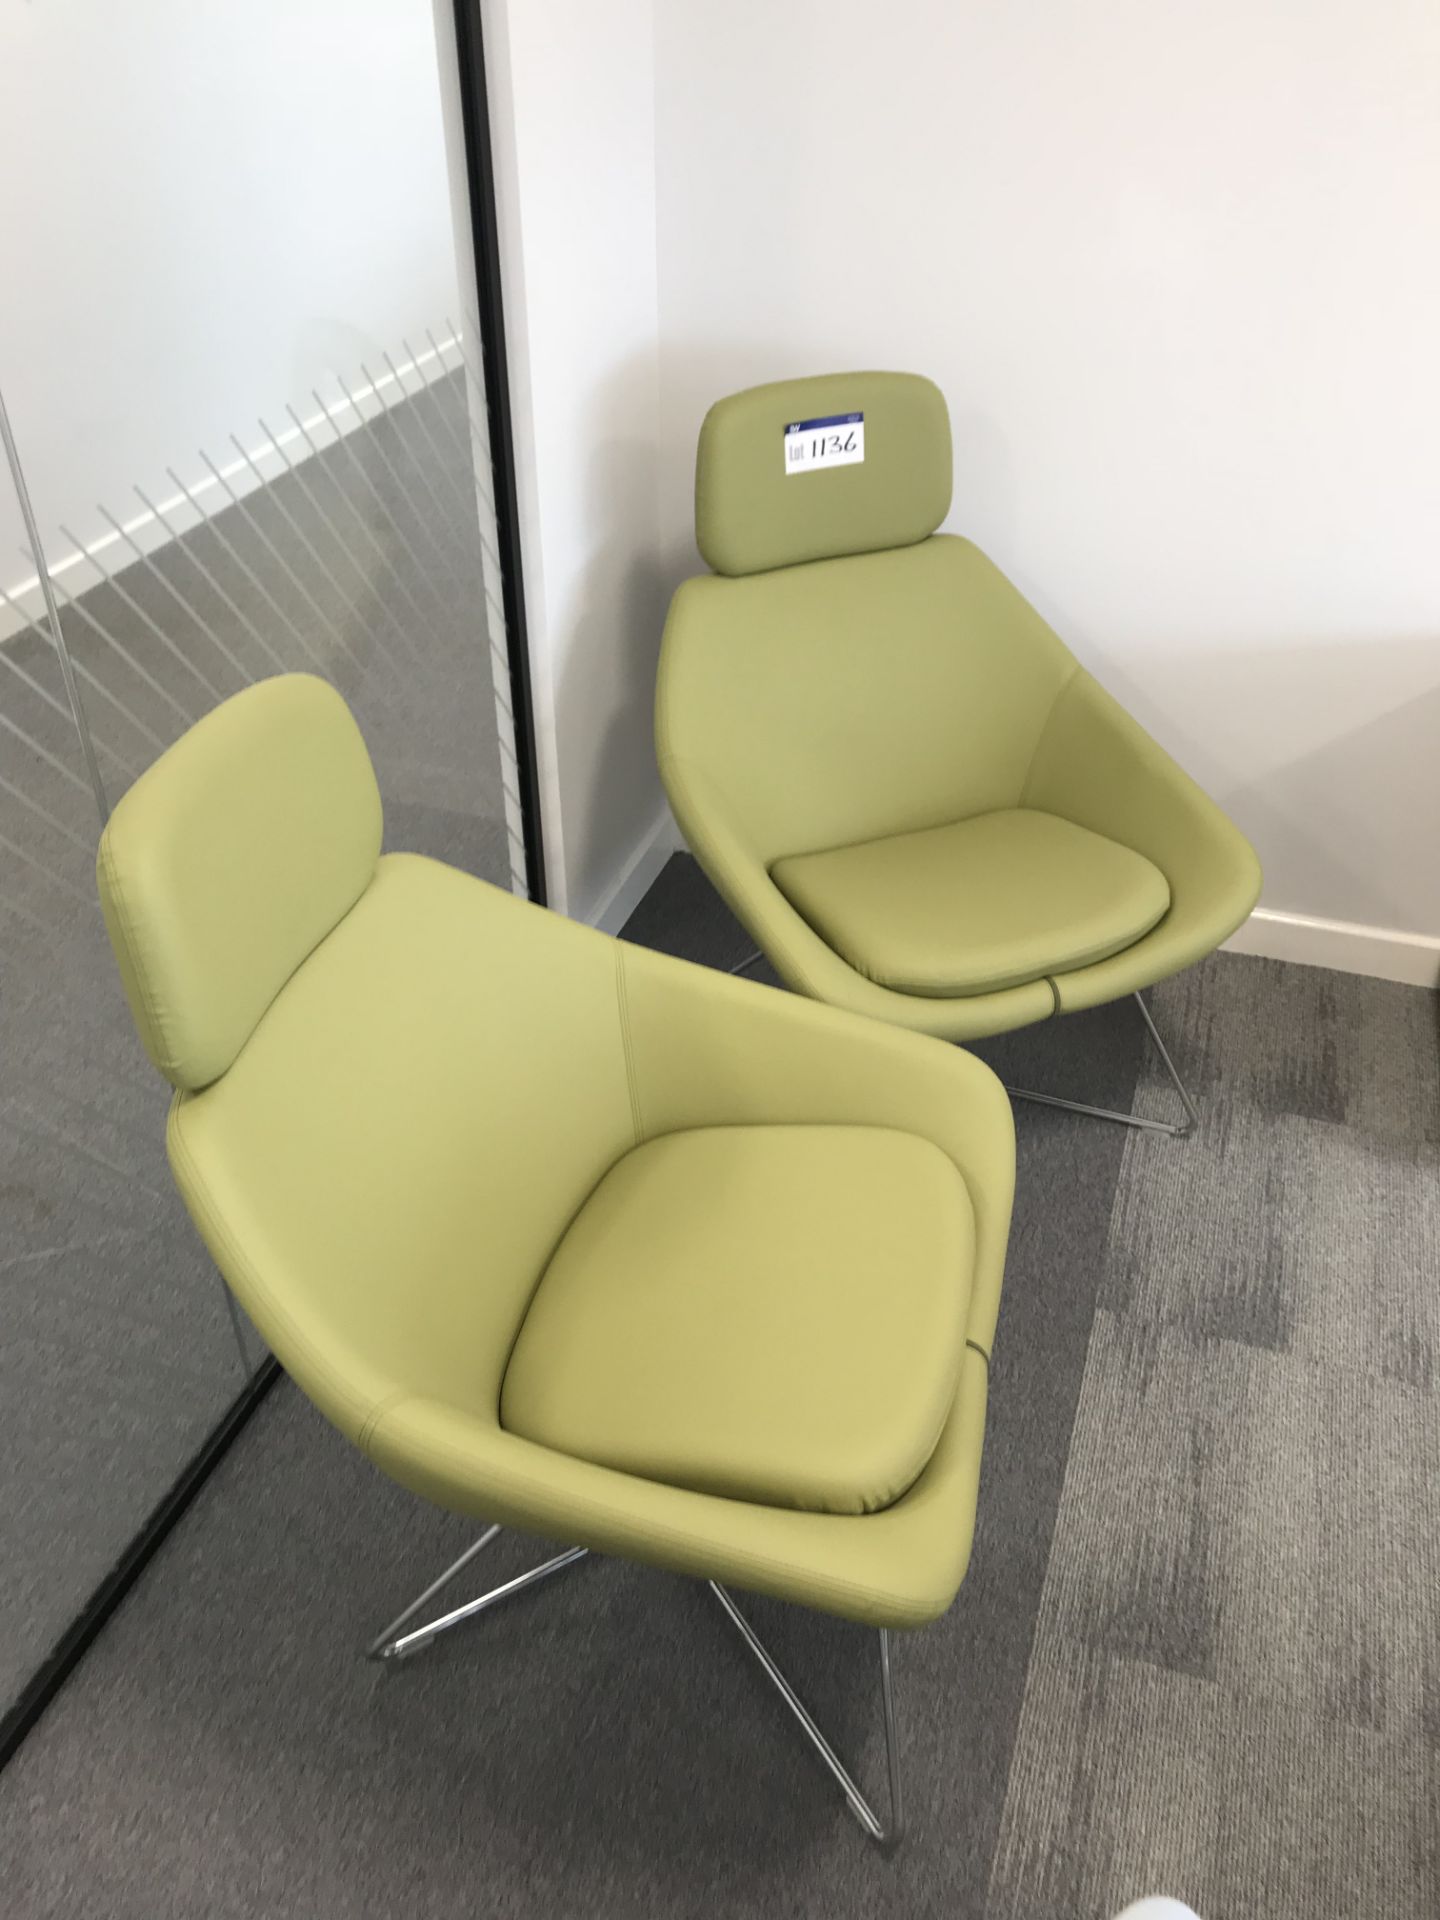 2 x Green Upholstered Chairs